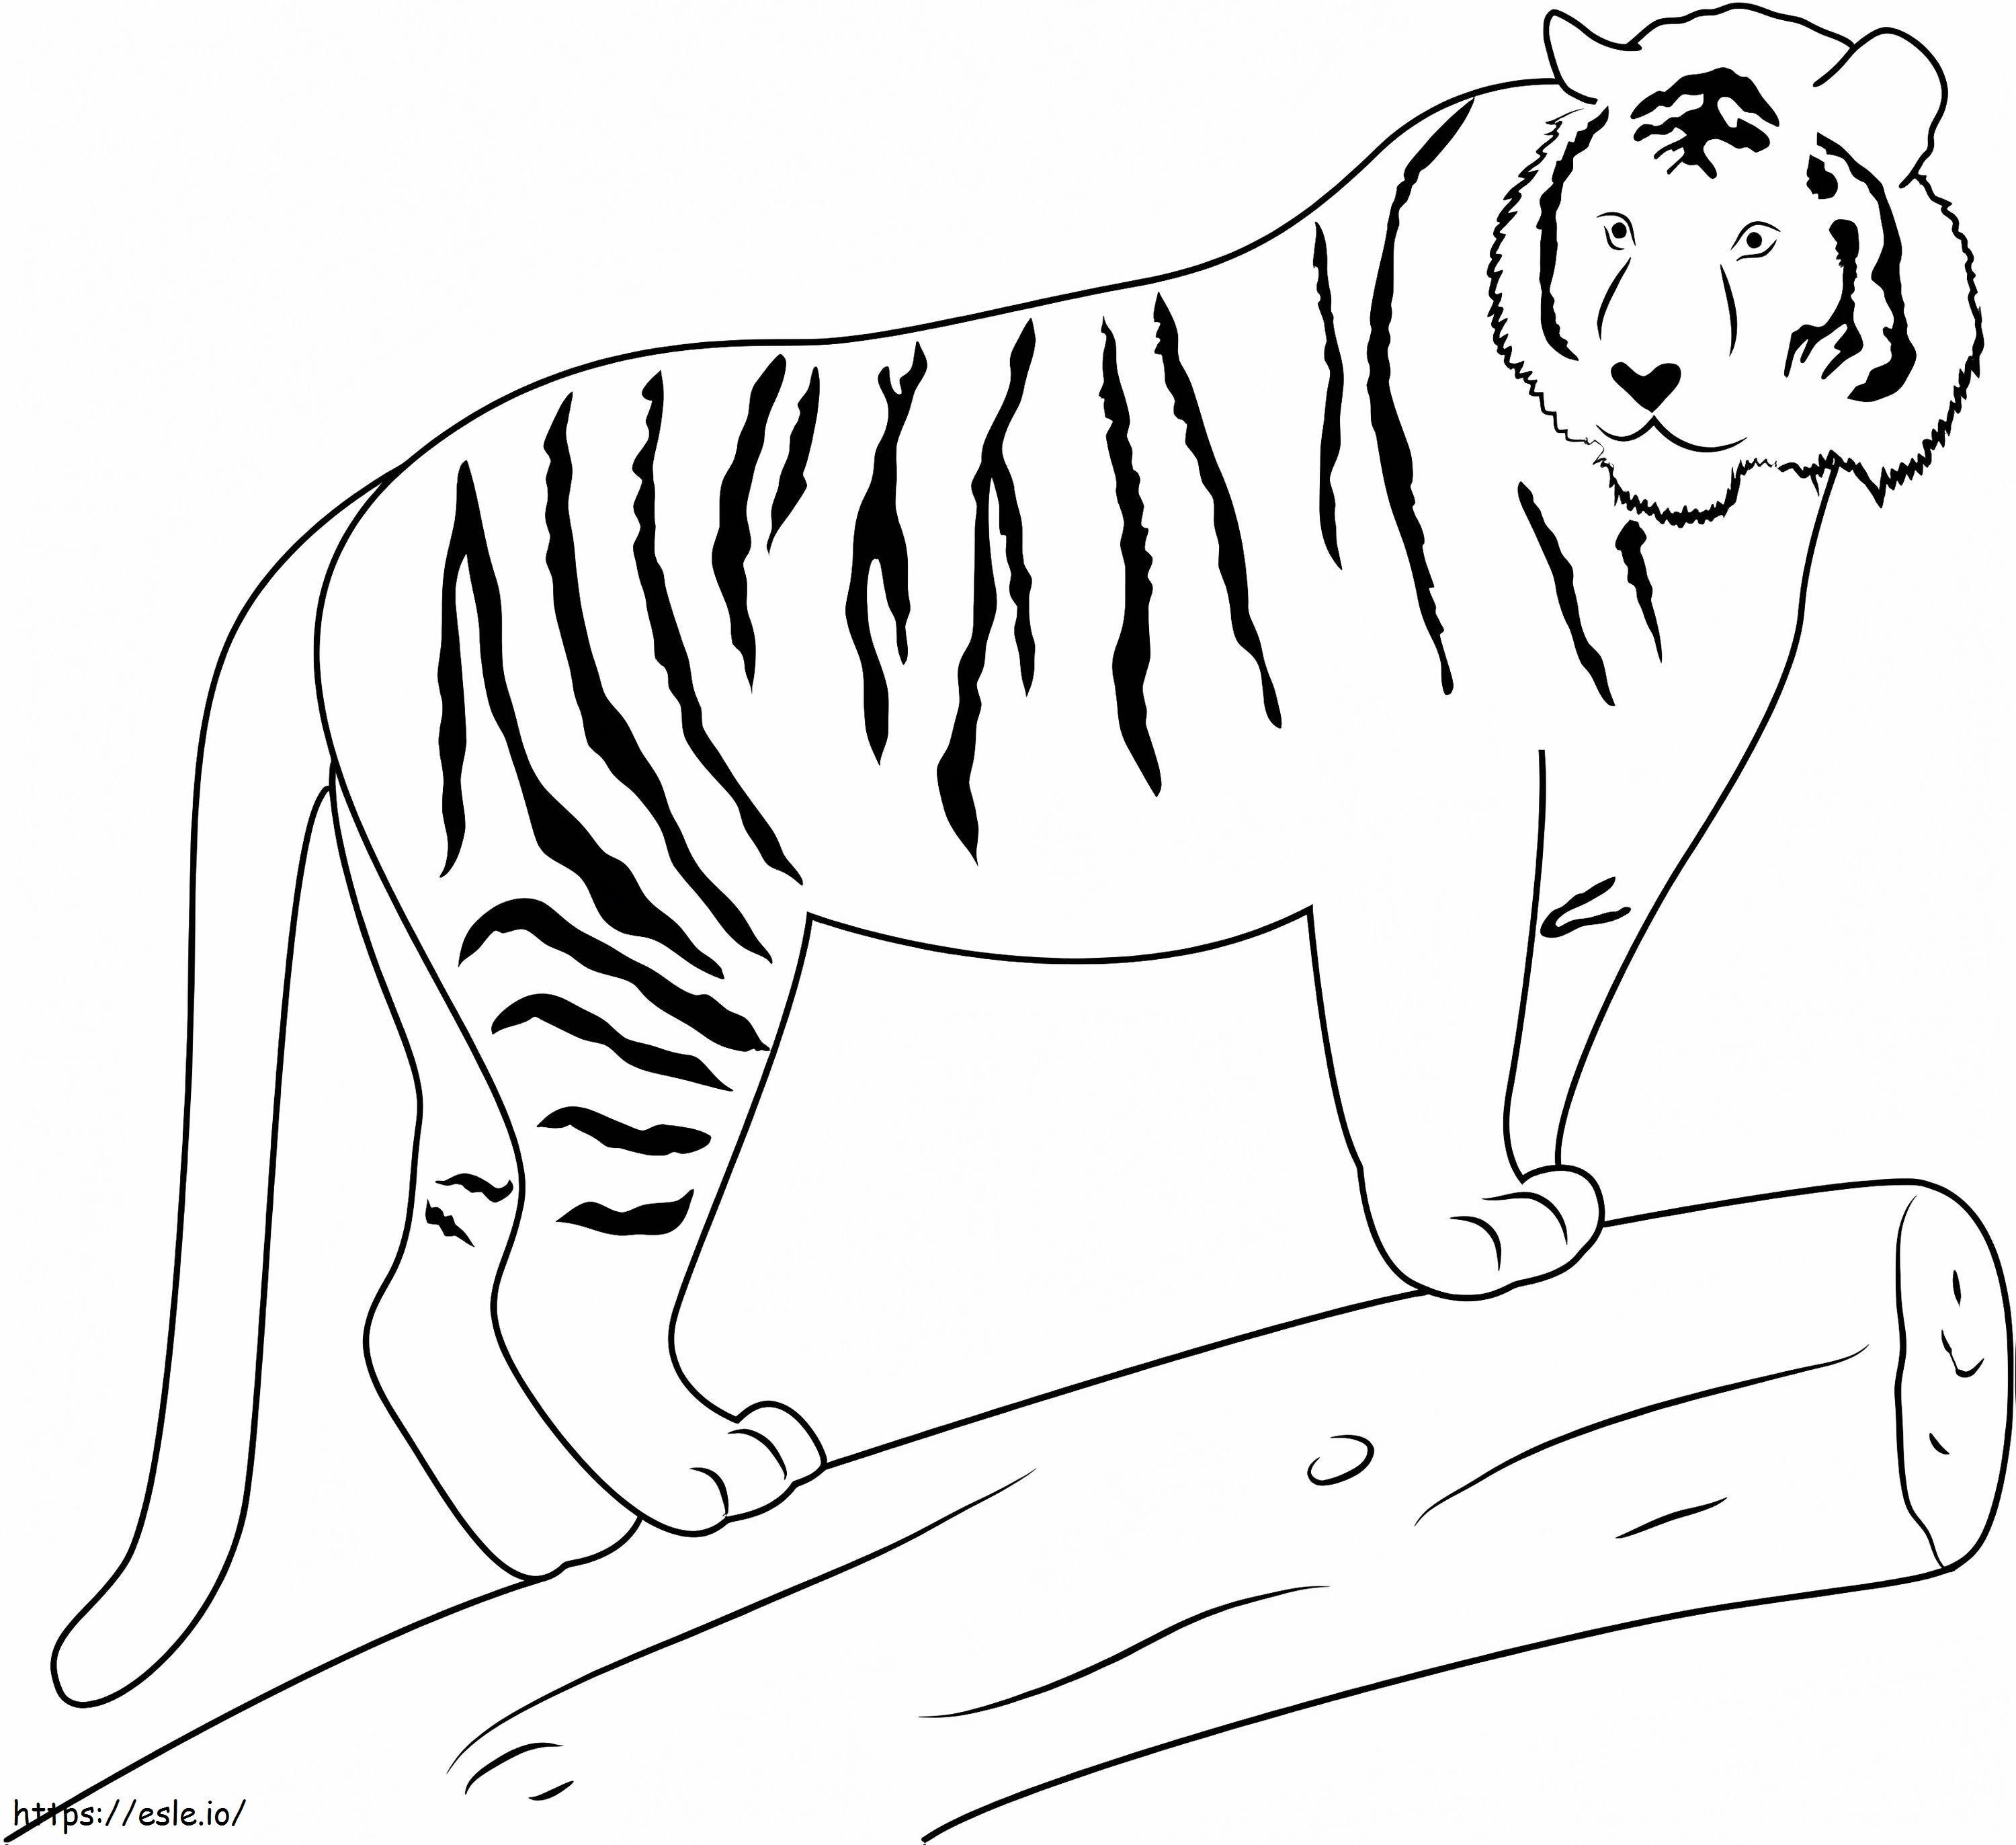 Tiger On Branch coloring page